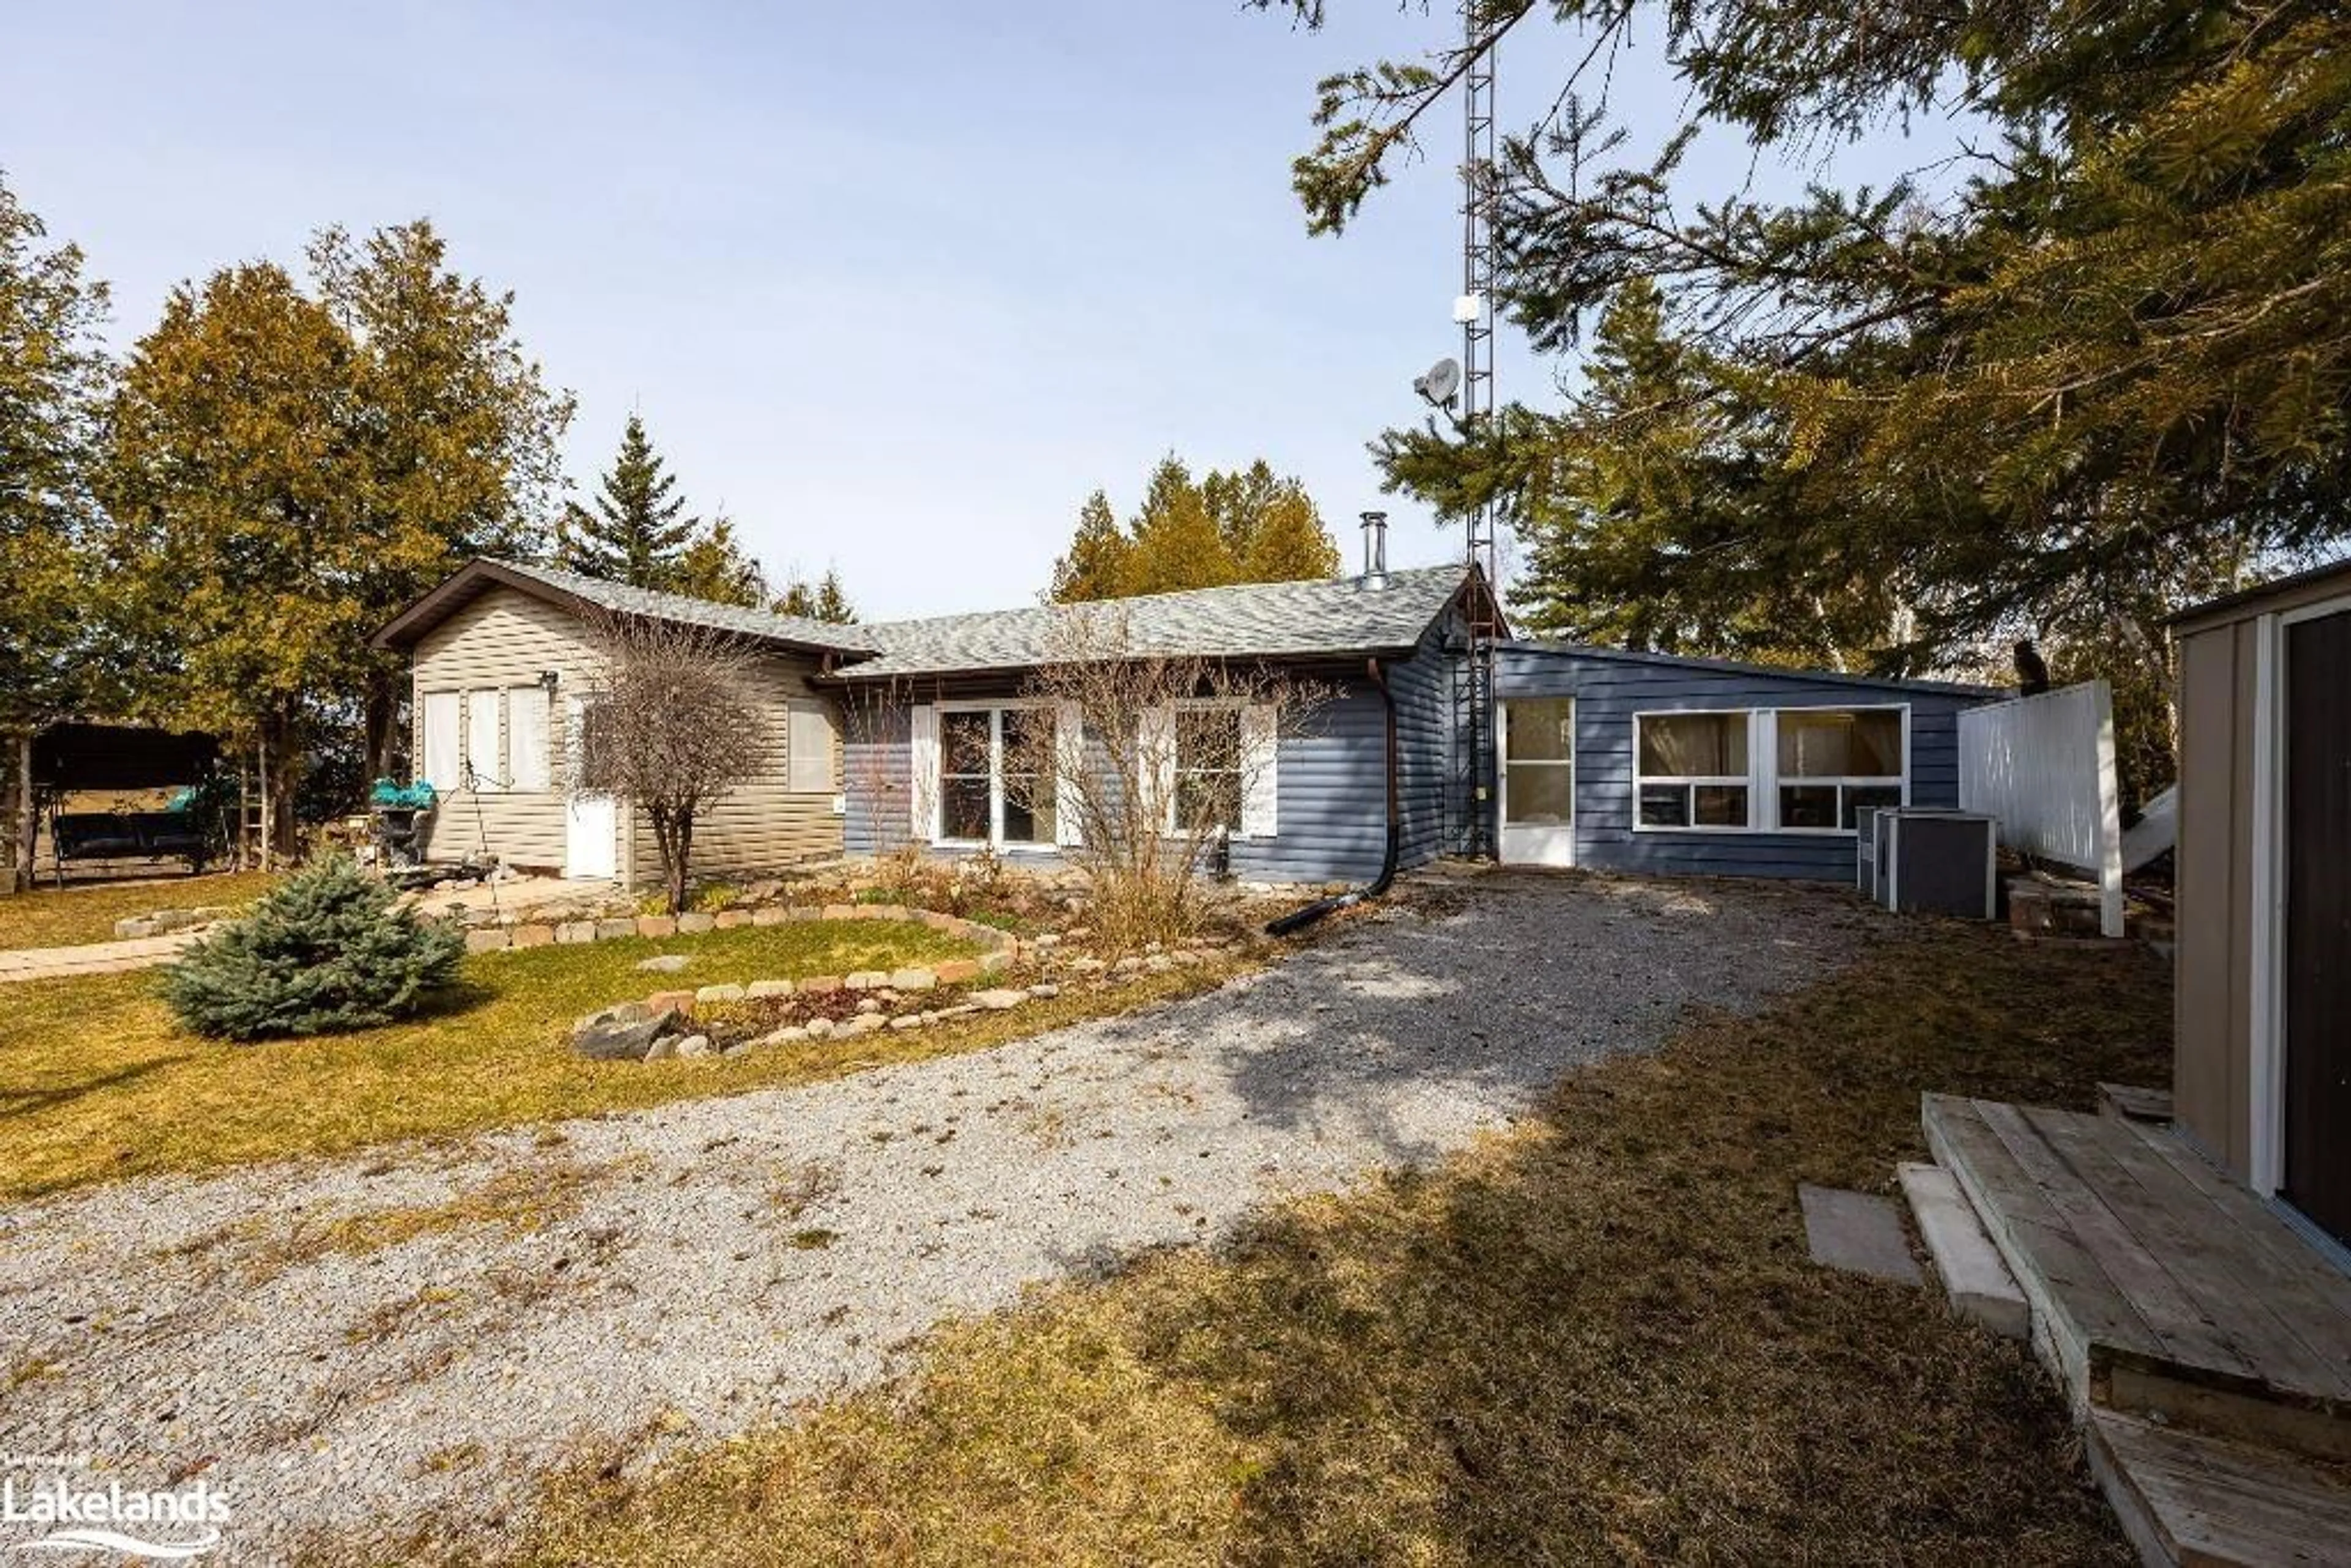 Outside view for 220 Mcguire Beach Rd, Kirkfield Ontario K0M 2B0